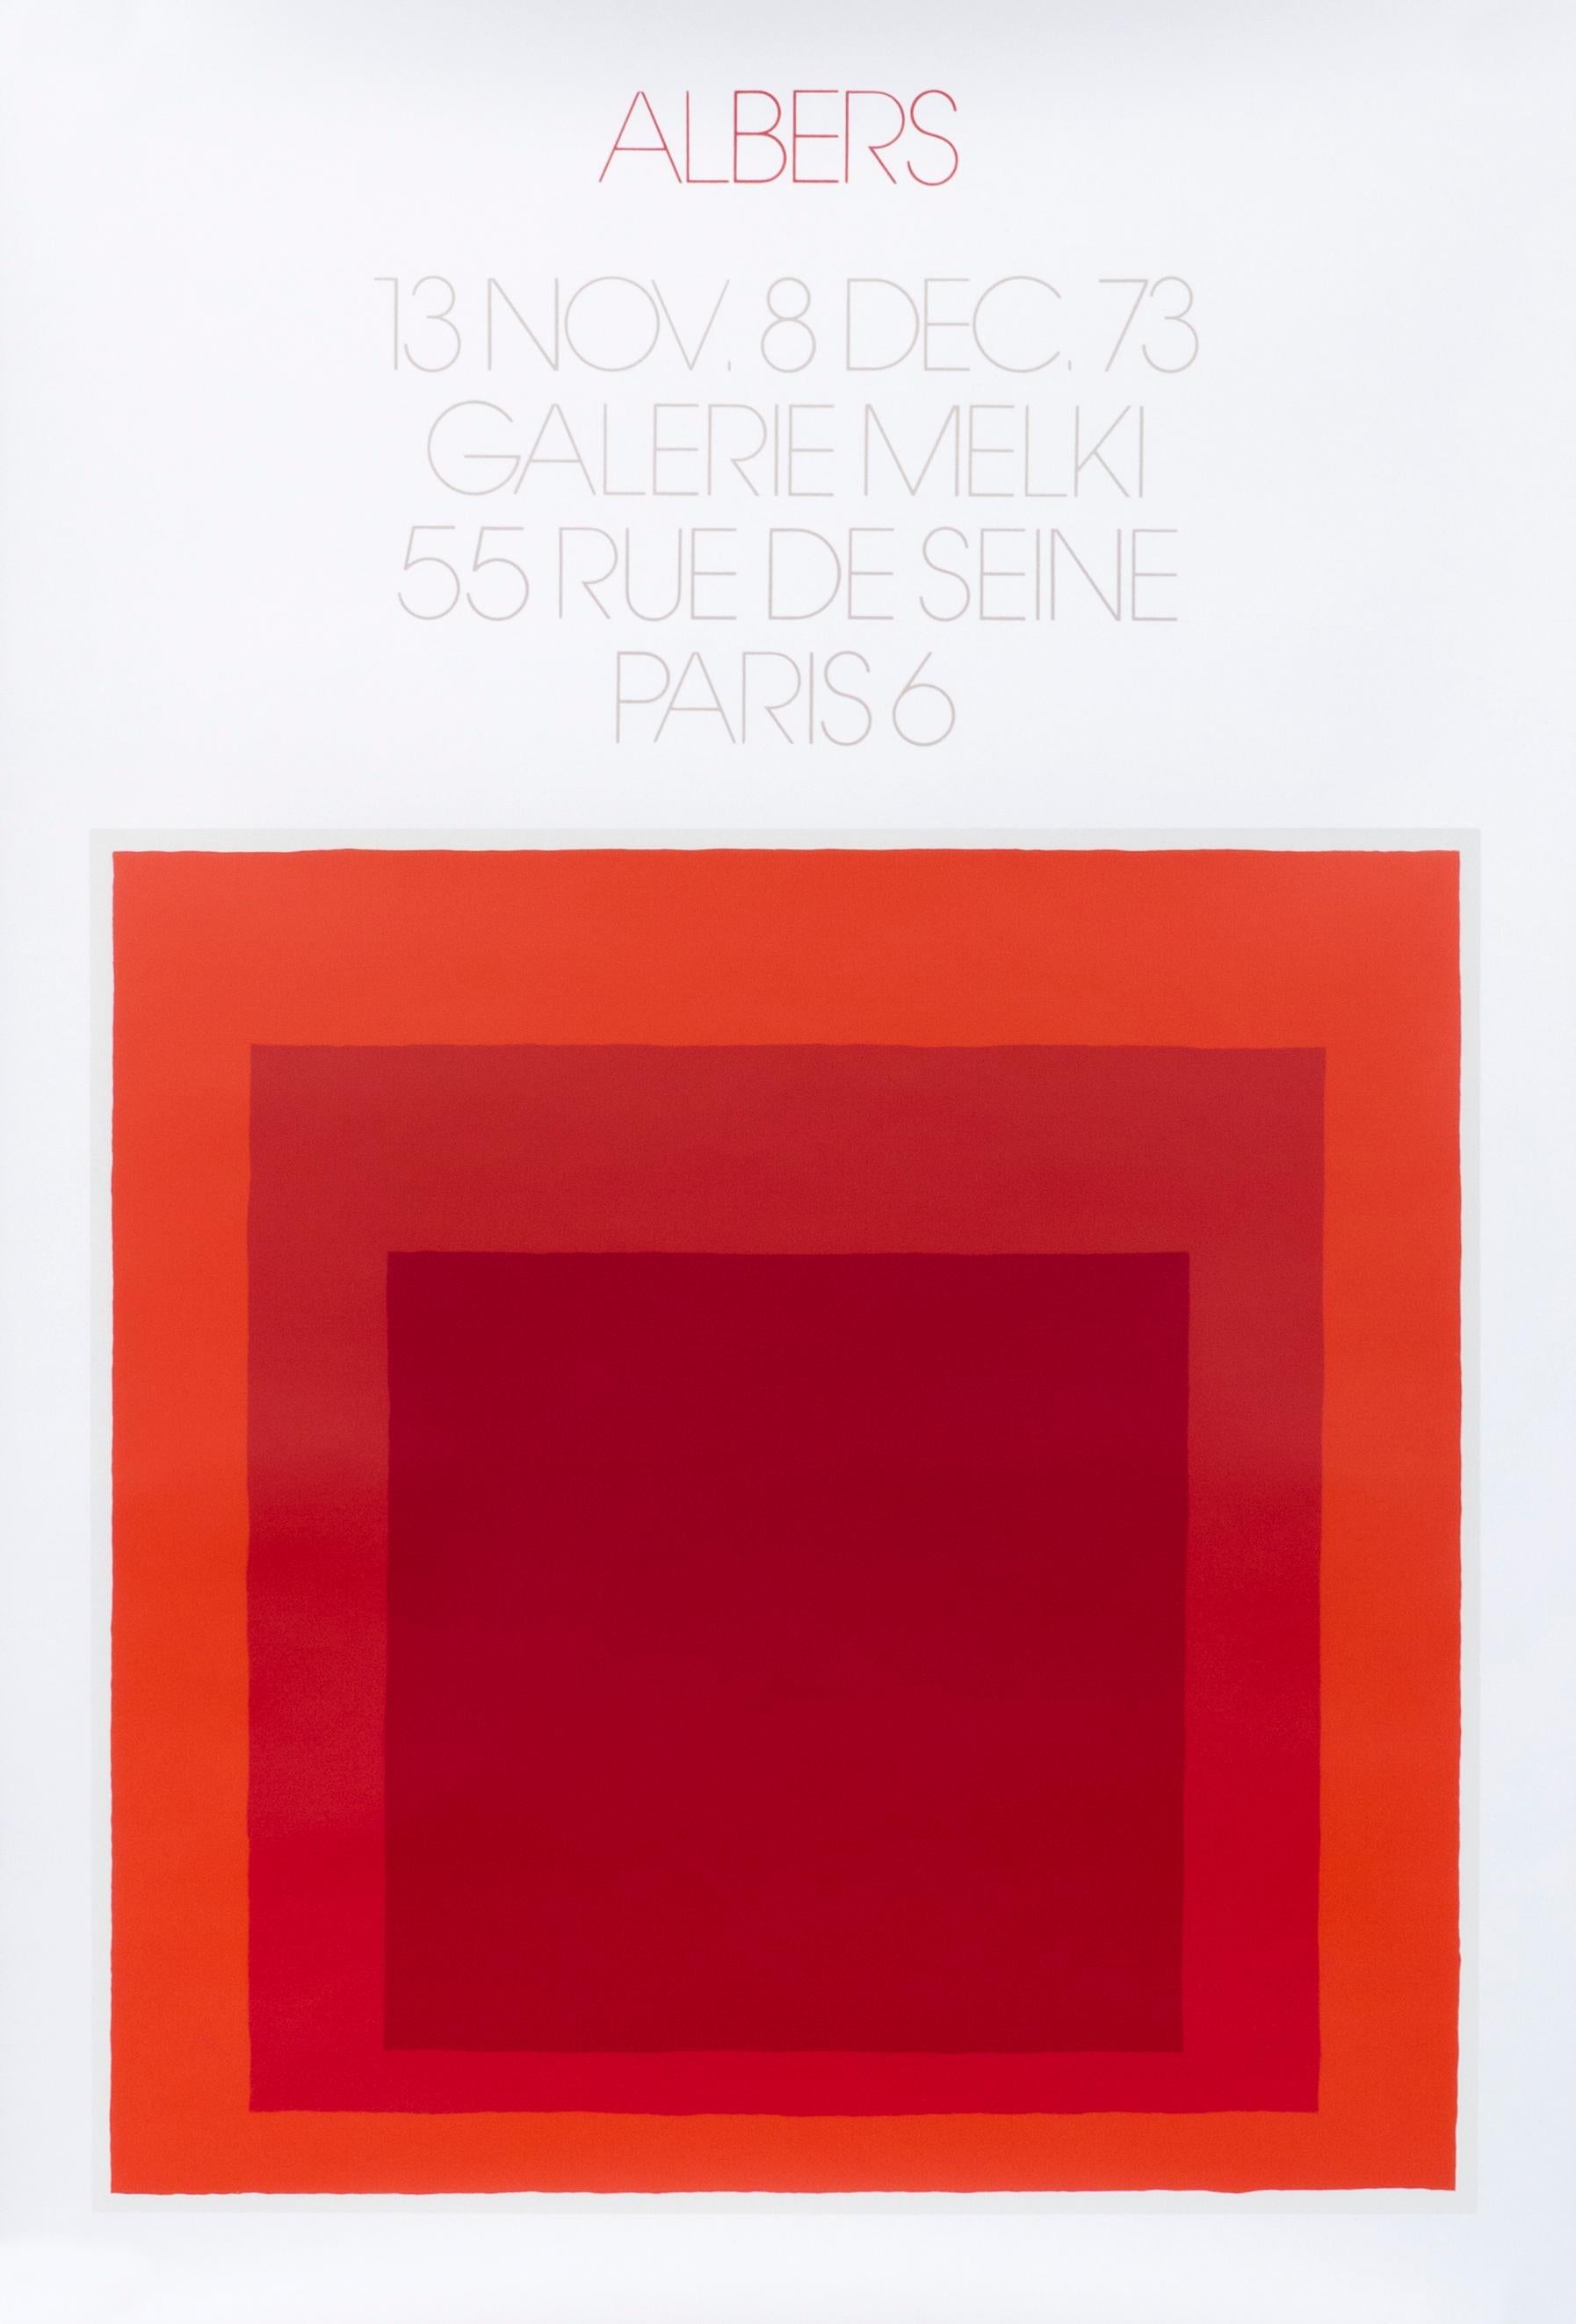 "Albers - Galerie Melki Paris (red)" Homage to the Square Mid Century poster - Print by Josef Albers